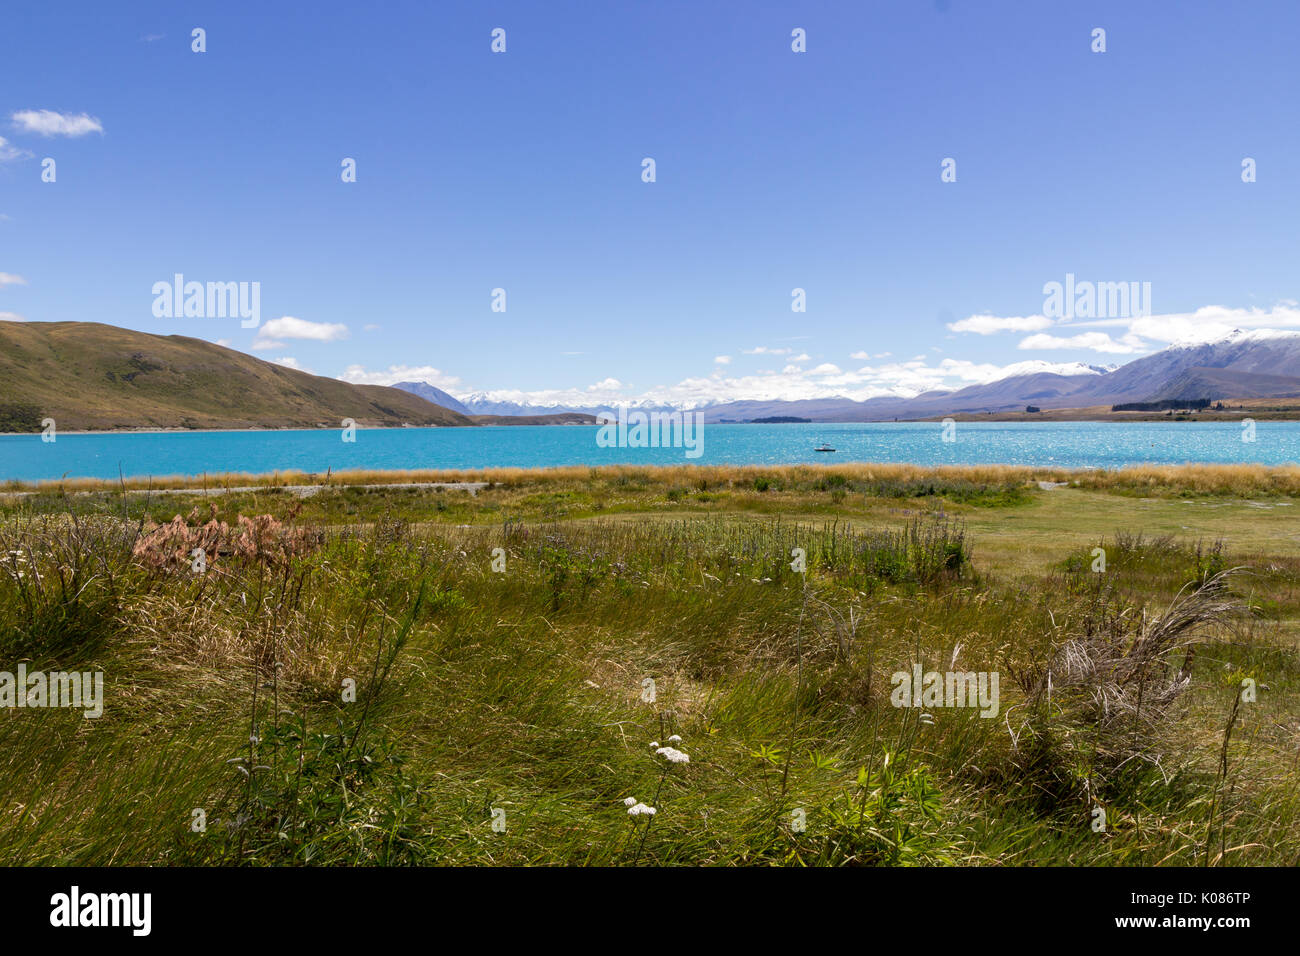 View of a lake at Glenorchy, New Zealand. Stock Photo